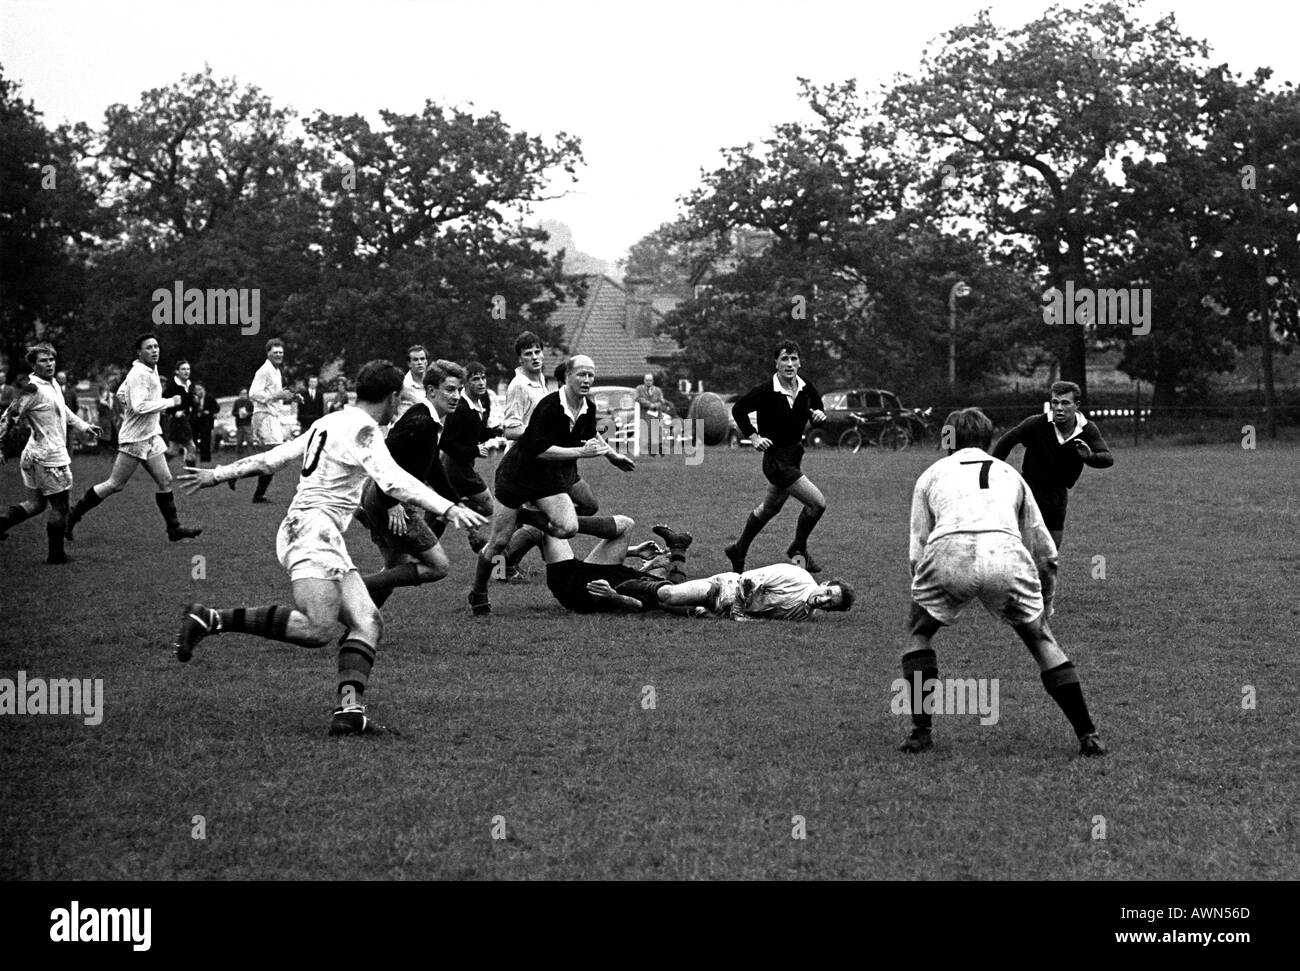 Rugby match at Southgate London Vintage 1964 Stock Photo